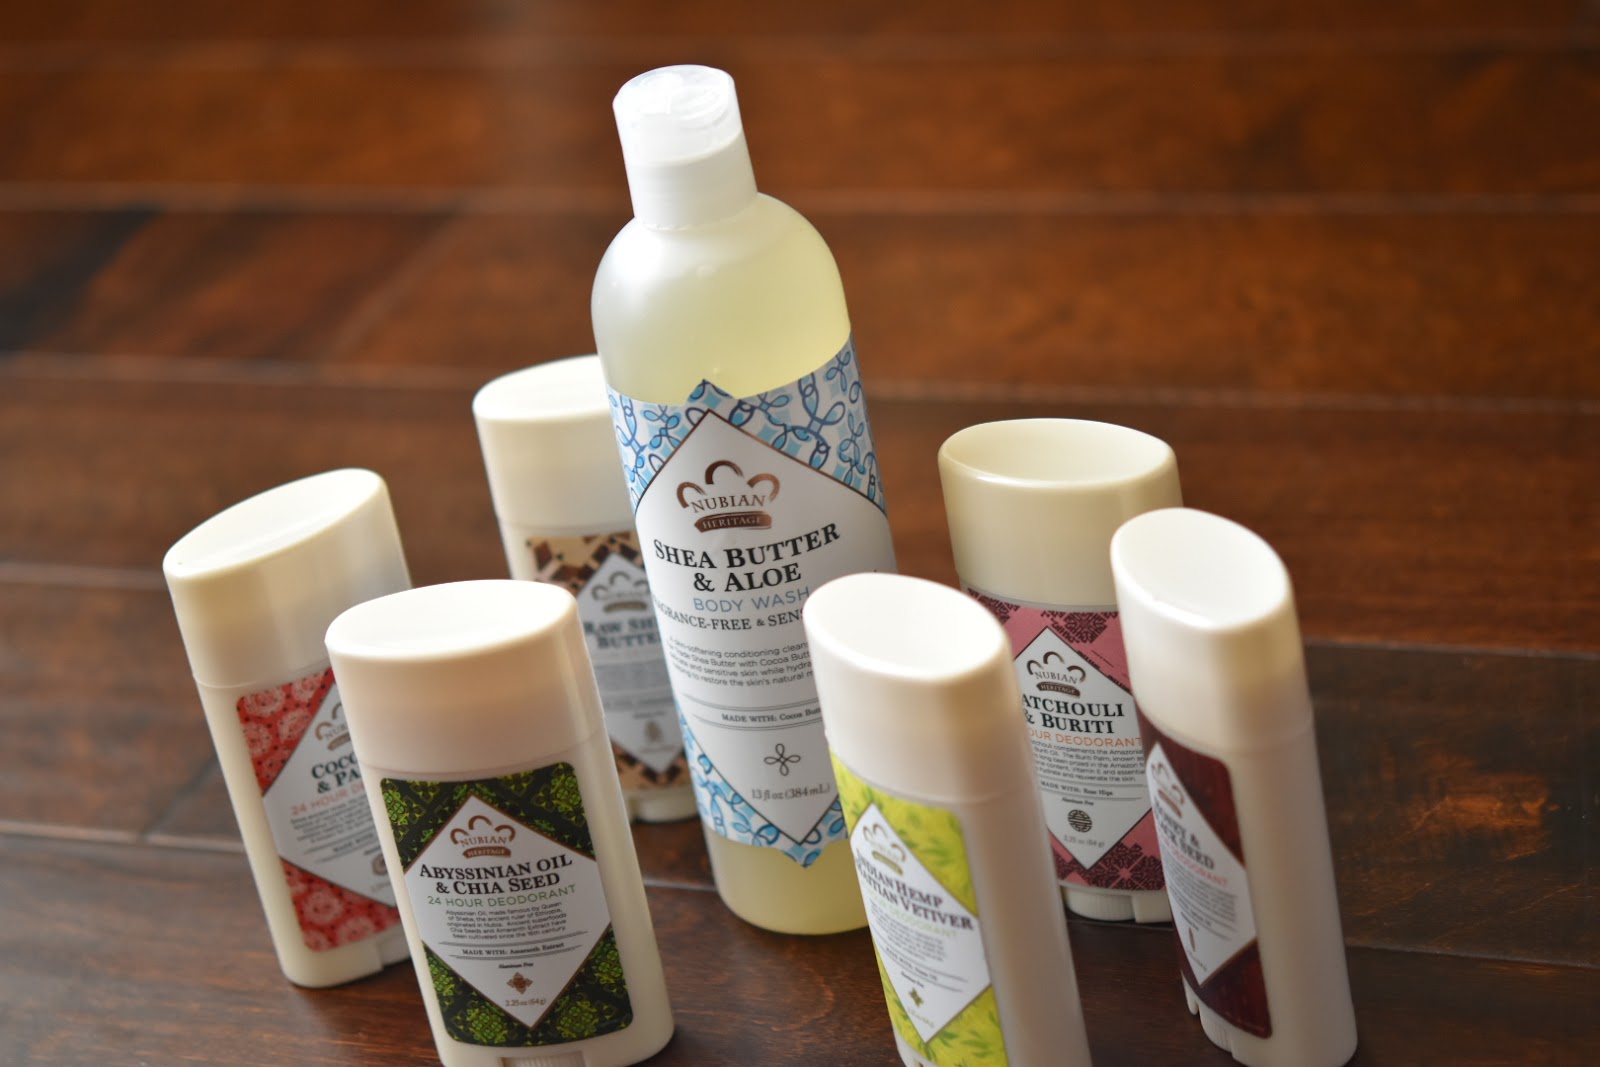 Returning to My Beauty Care Favorite Nubian Heritage: Aluminum-Free 24-Hour Deodorants and Shea Butter & Aloe Body Wash Review  via  www.productreviewmom.com